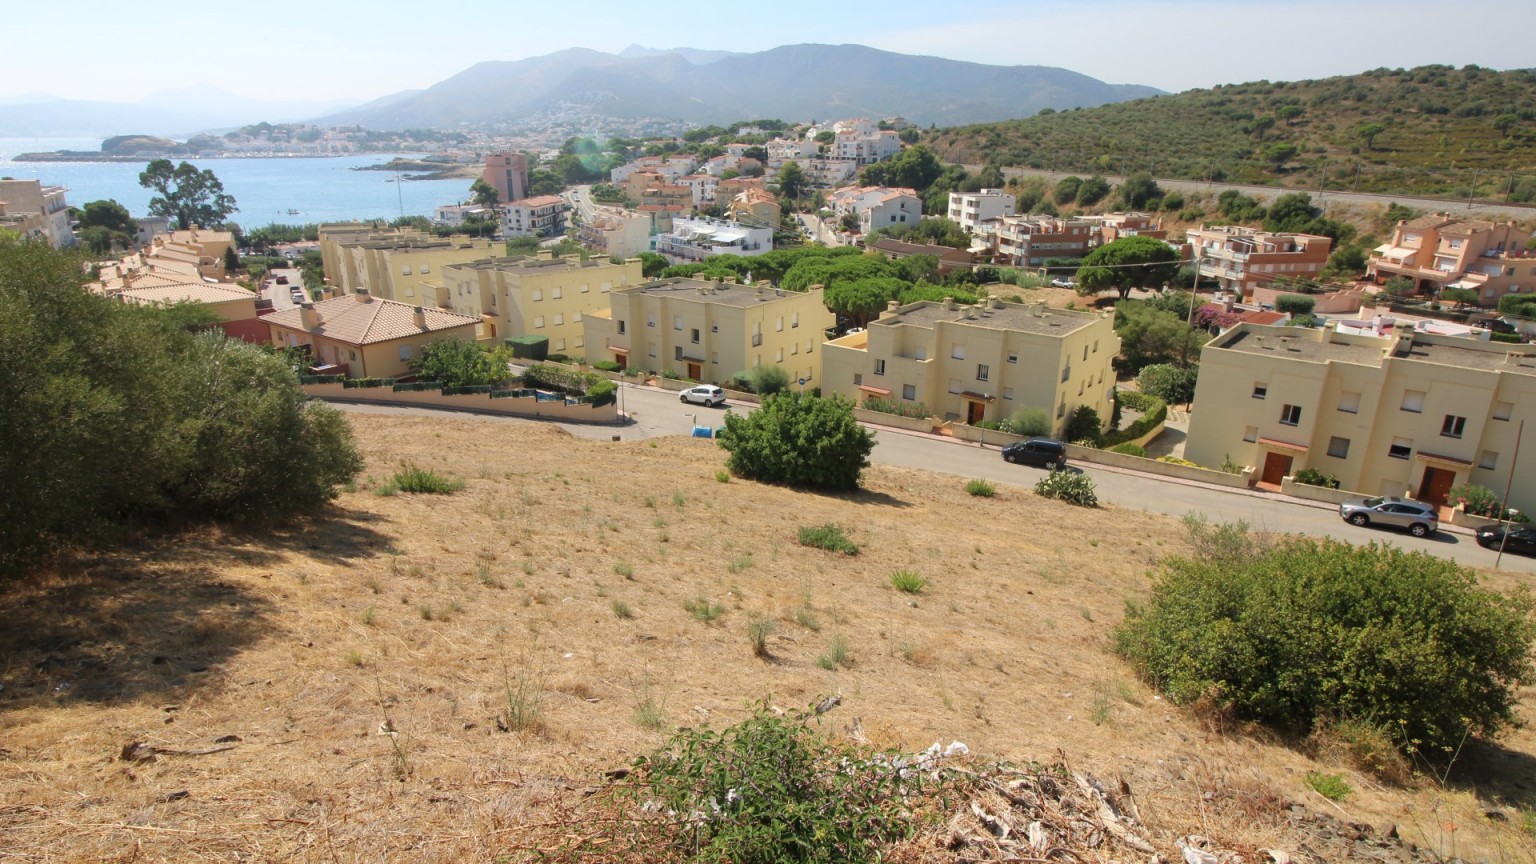 Plot of land for sale in Grifeu area